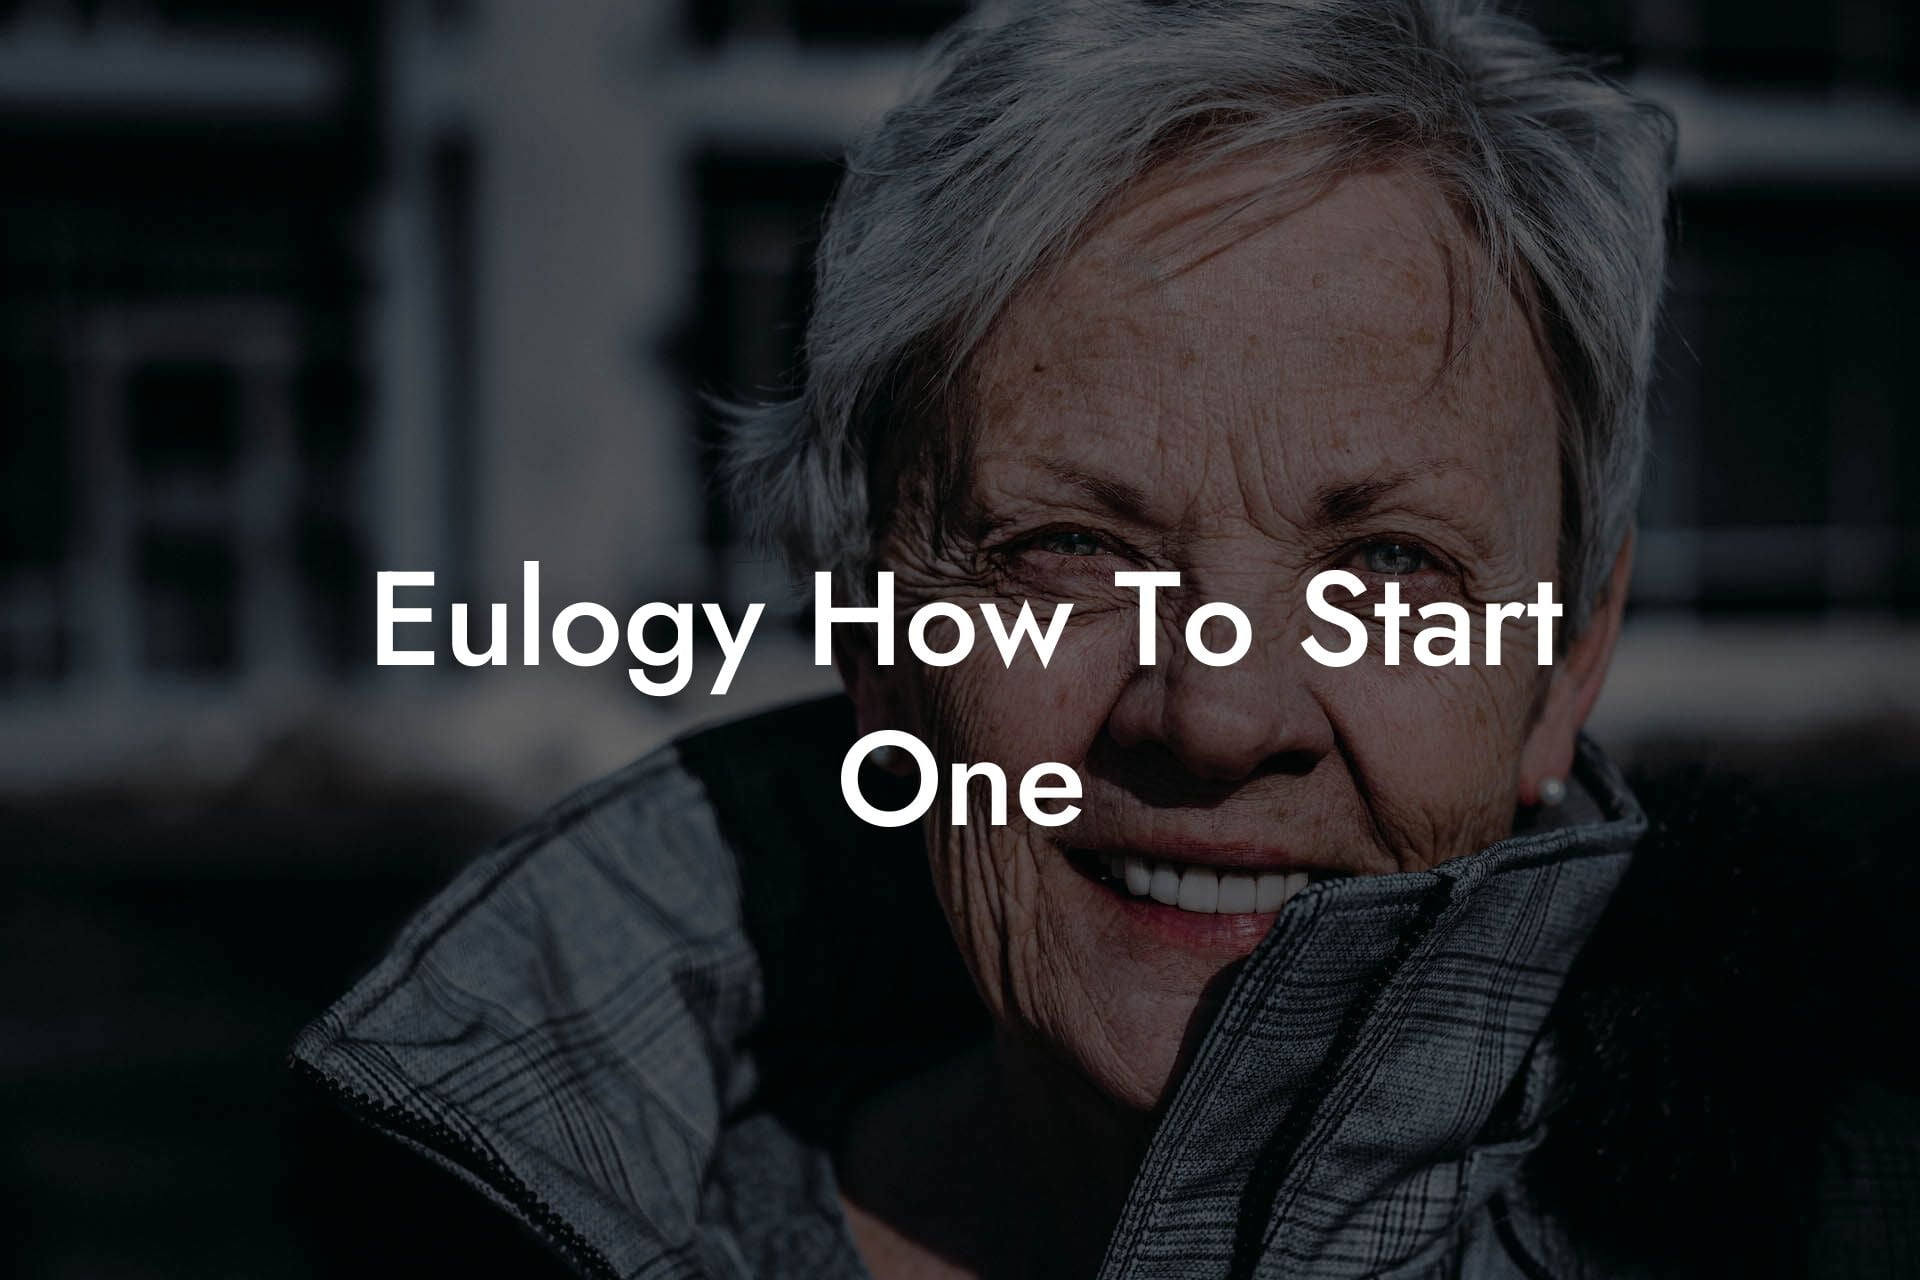 Eulogy How To Start One